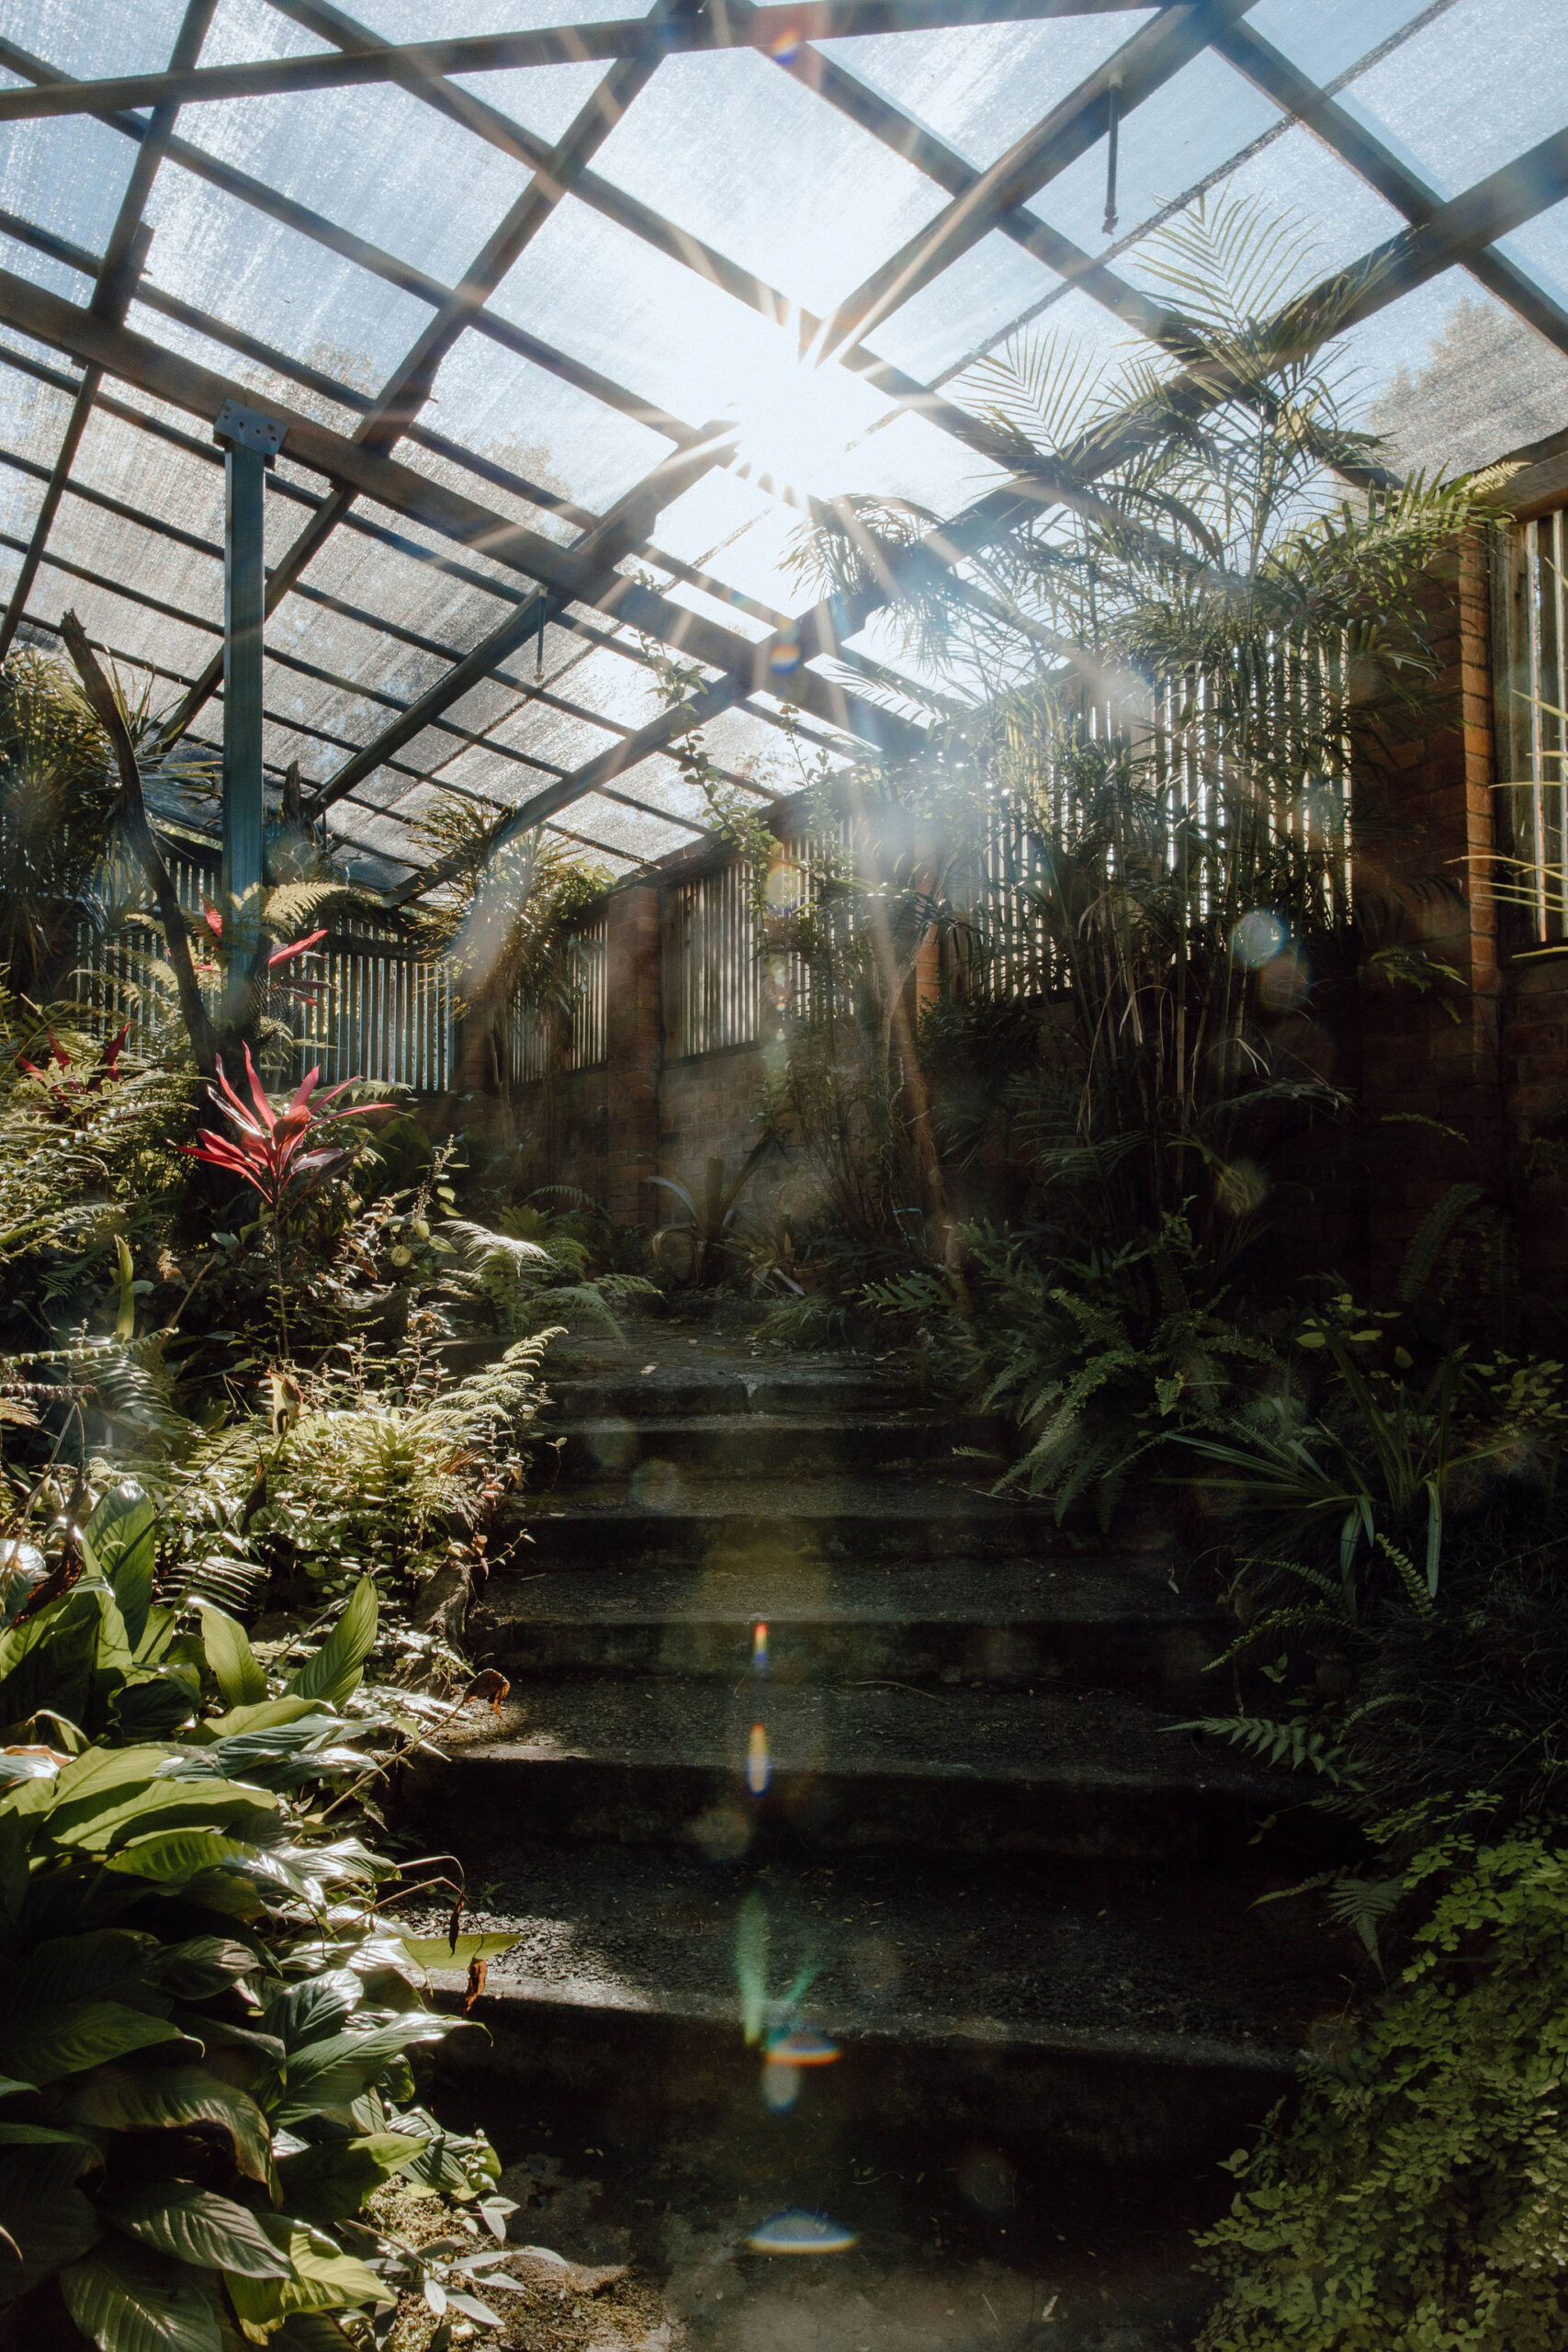 Inside the Queens Park glasshouse. PHOTO: Chrystal Rose Photography